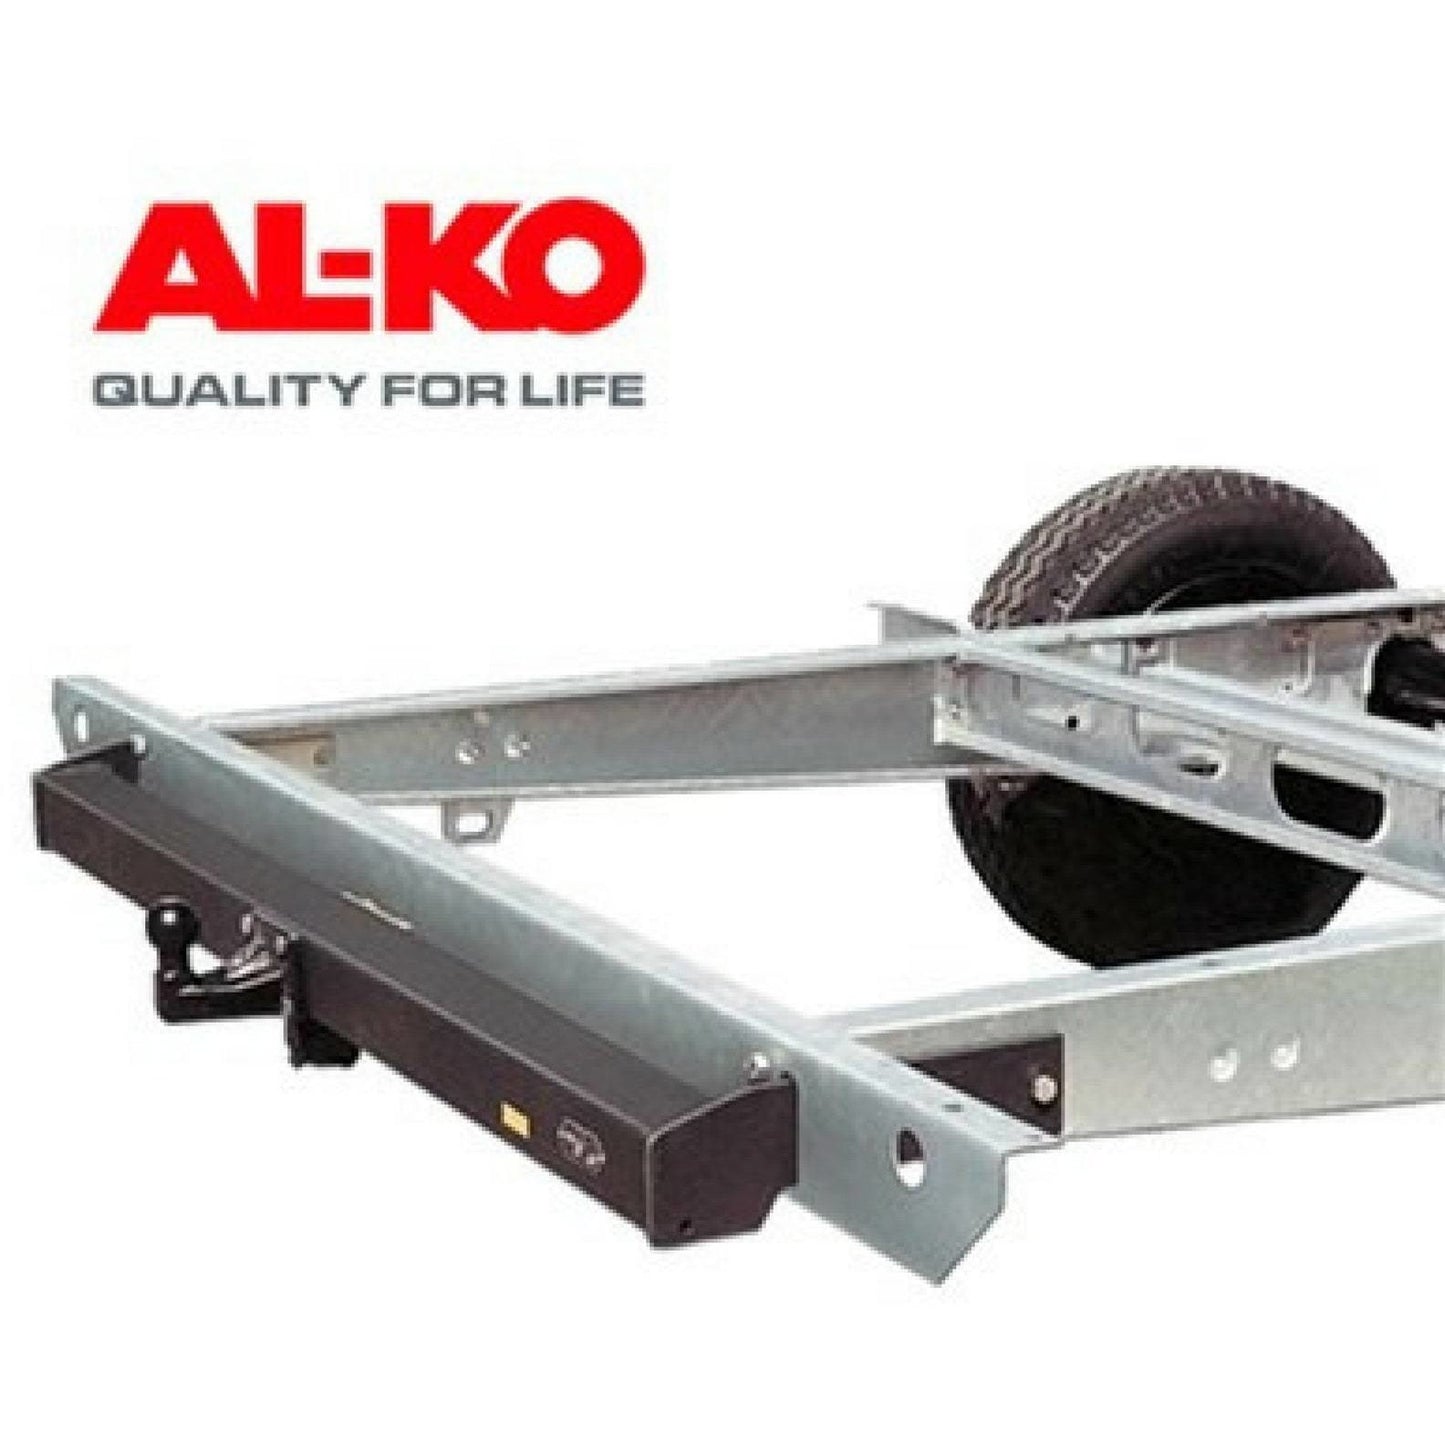 ALKO Towbar Assembly (1620423) made by ALKO. A Towing sold by Quality Caravan Awnings